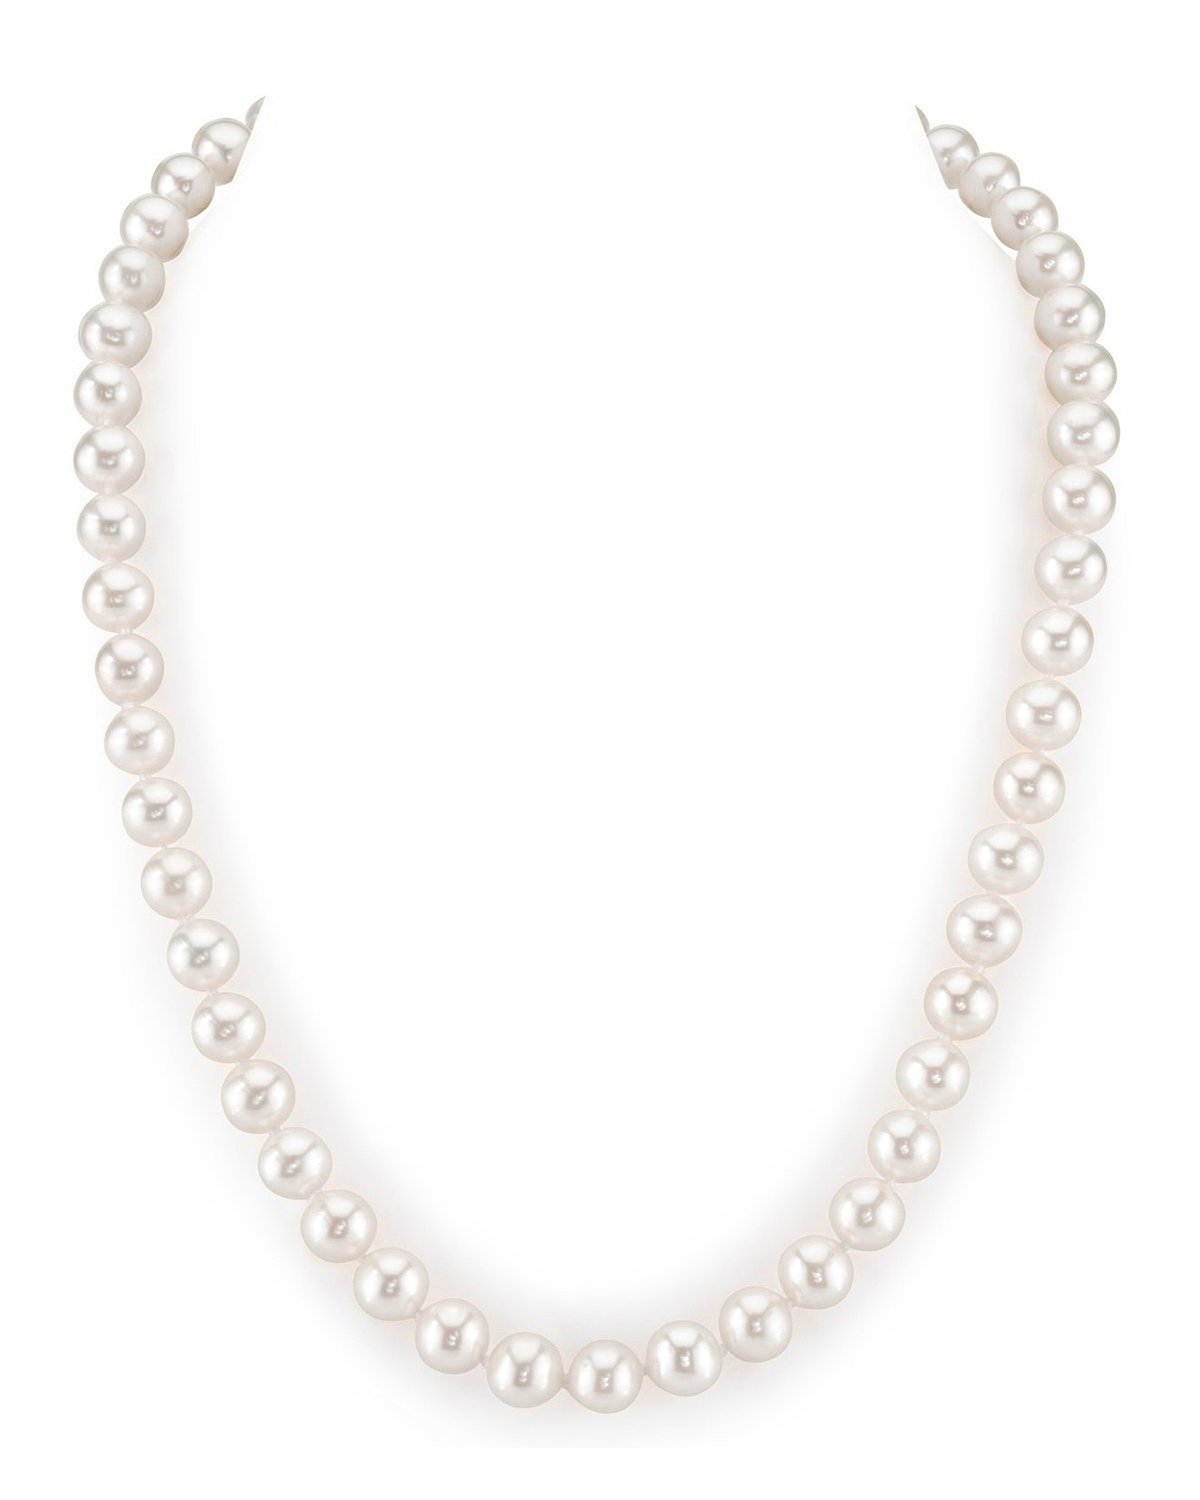 Freshwater Pearl Necklaces, 14 MM LUSTROUS WHITE PEARL NECKLACE -nk291